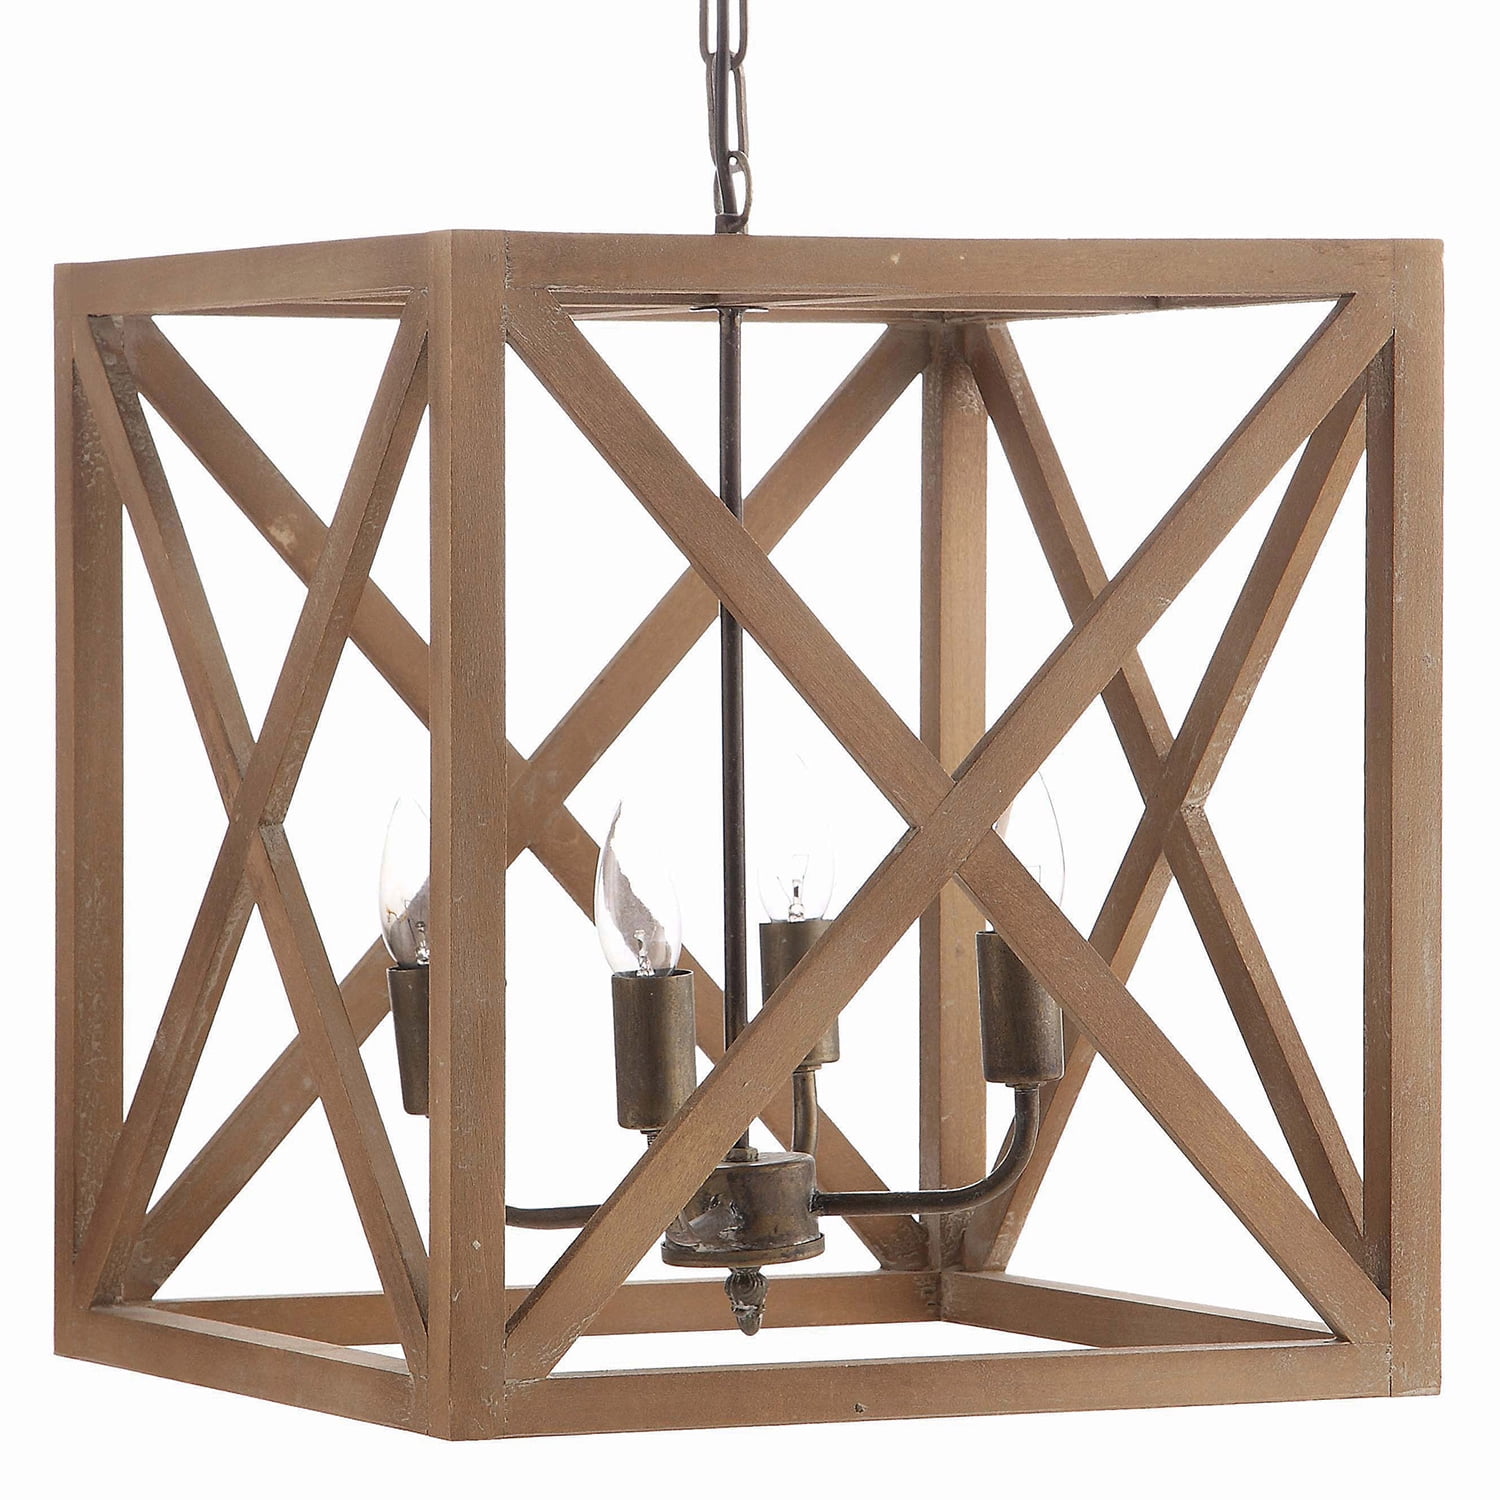 Shop Creative Co-Op Square Wood and Metal Chandelier from Walmart on Openhaus